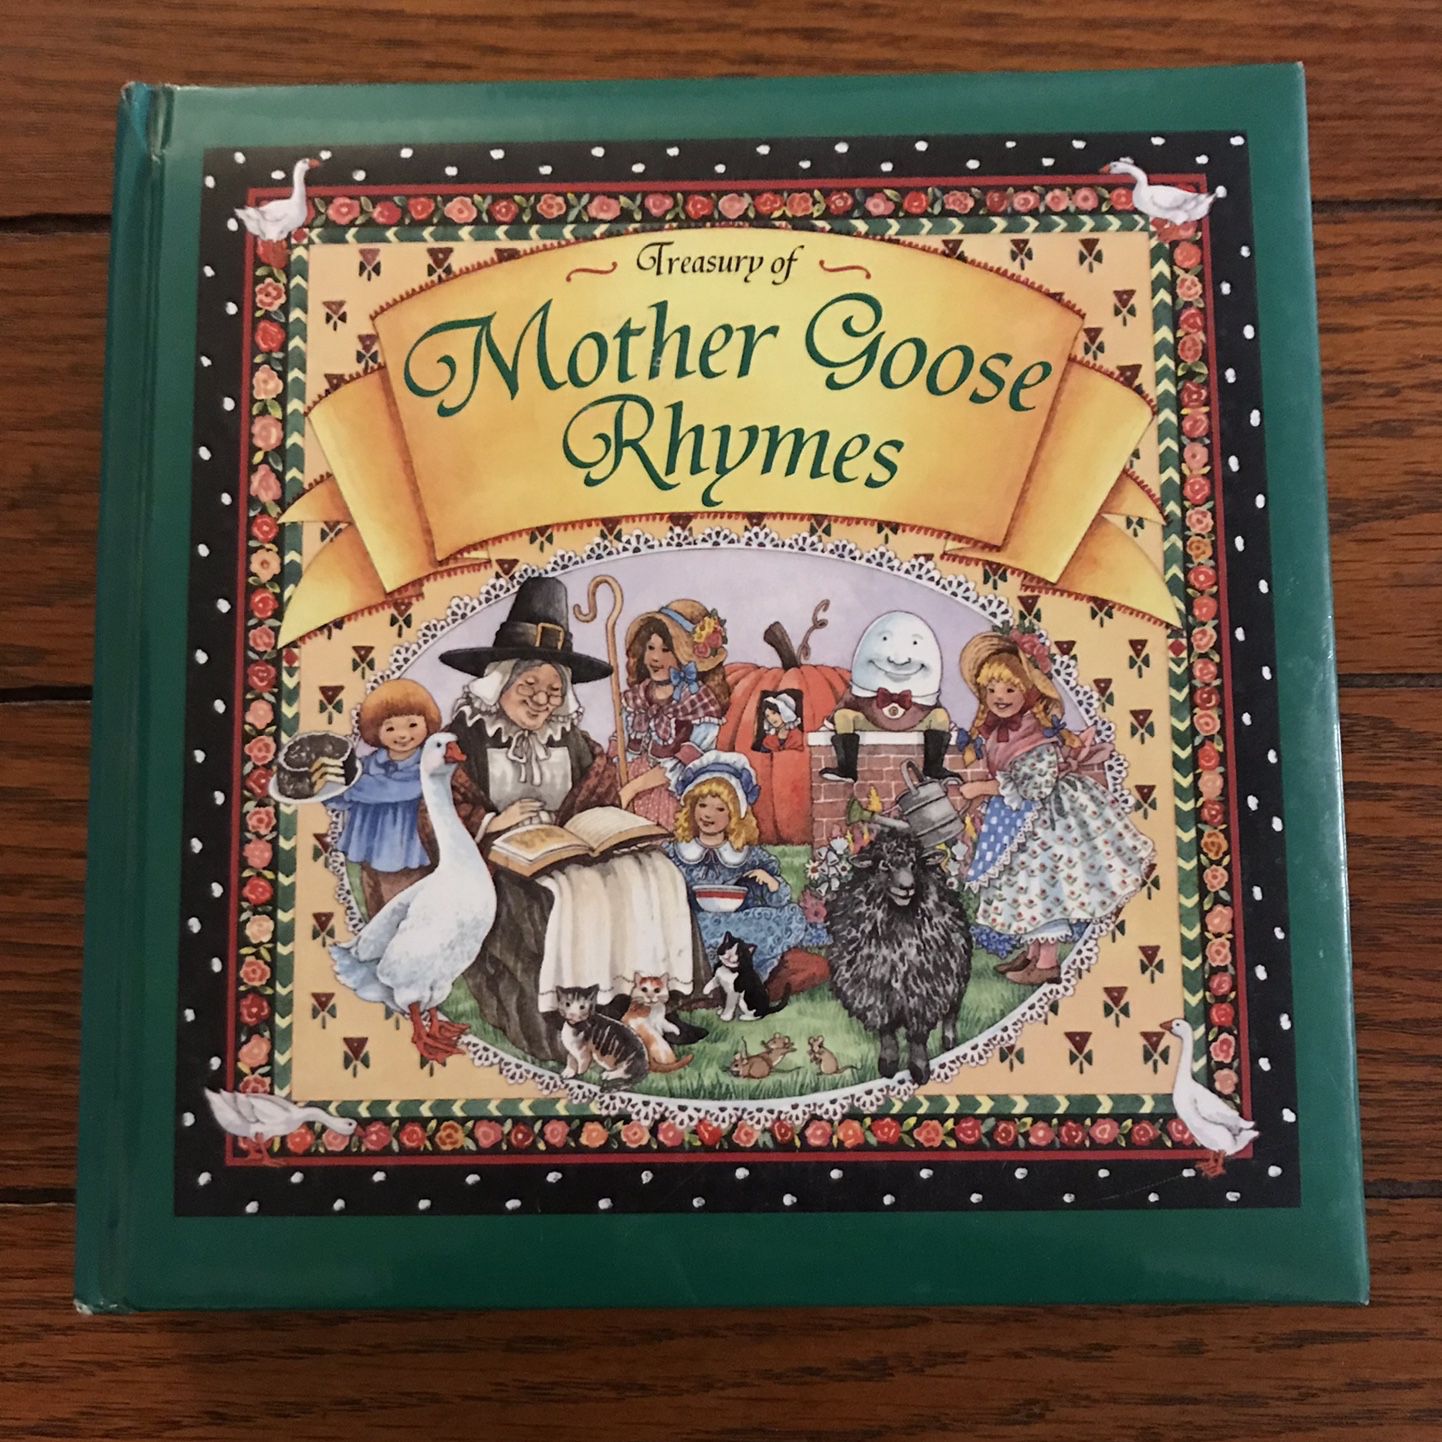 Treasury of Mother Goose Rhymes With Golden Edge Vintage 1996 Hardcover Book.